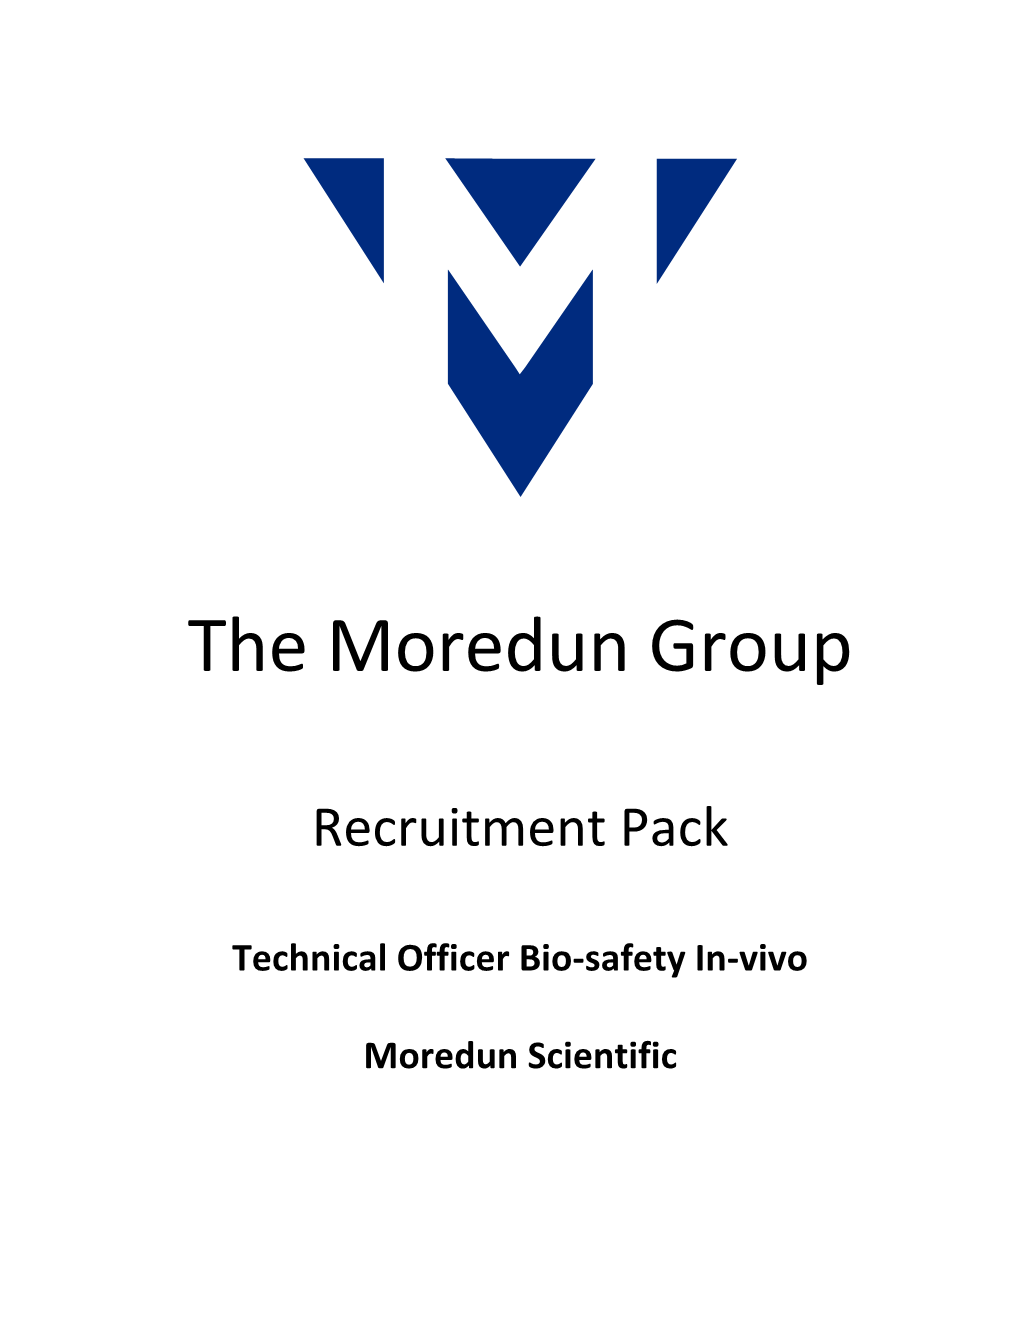 Technical Officer Bio-Safety In-Vivo